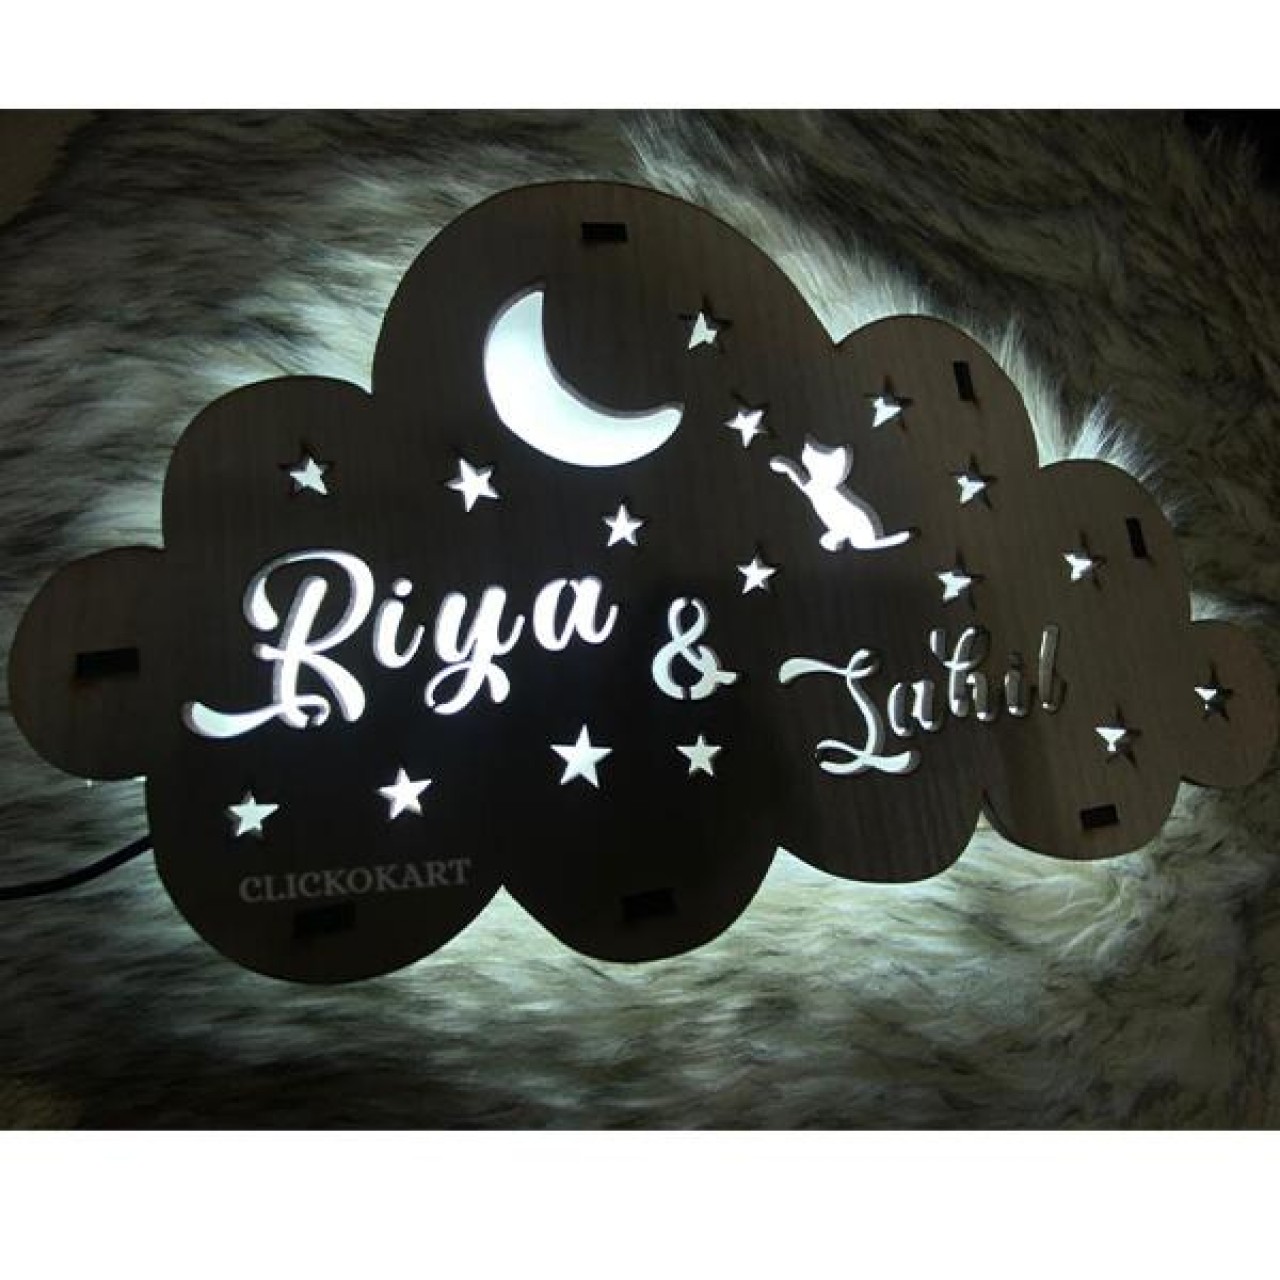 Wooden Cloud Led Name Board